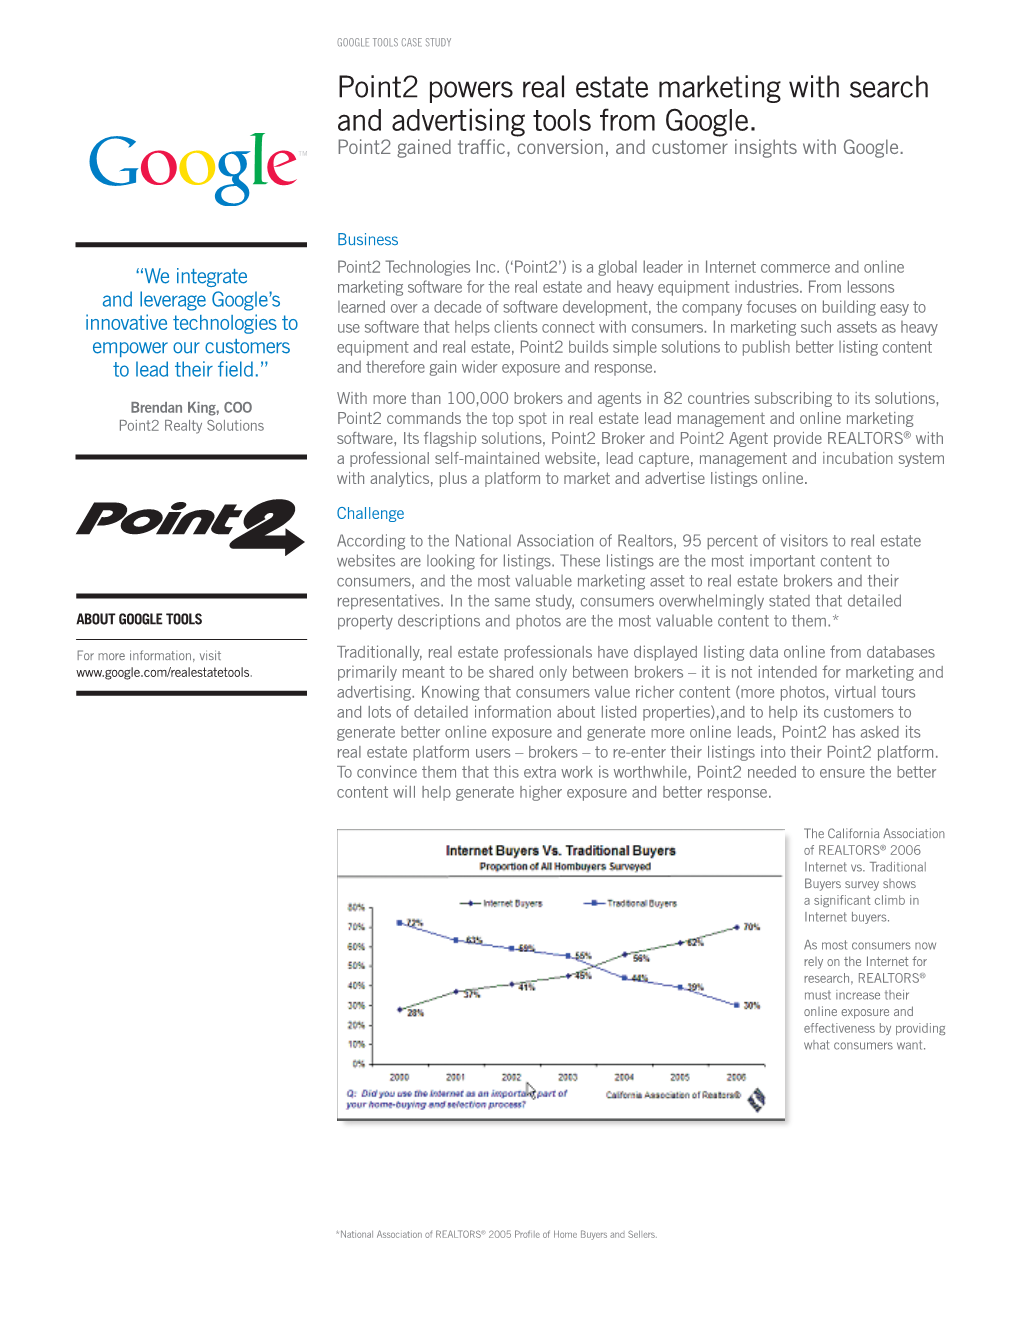 Point2 Powers Real Estate Marketing with Search and Advertising Tools from Google